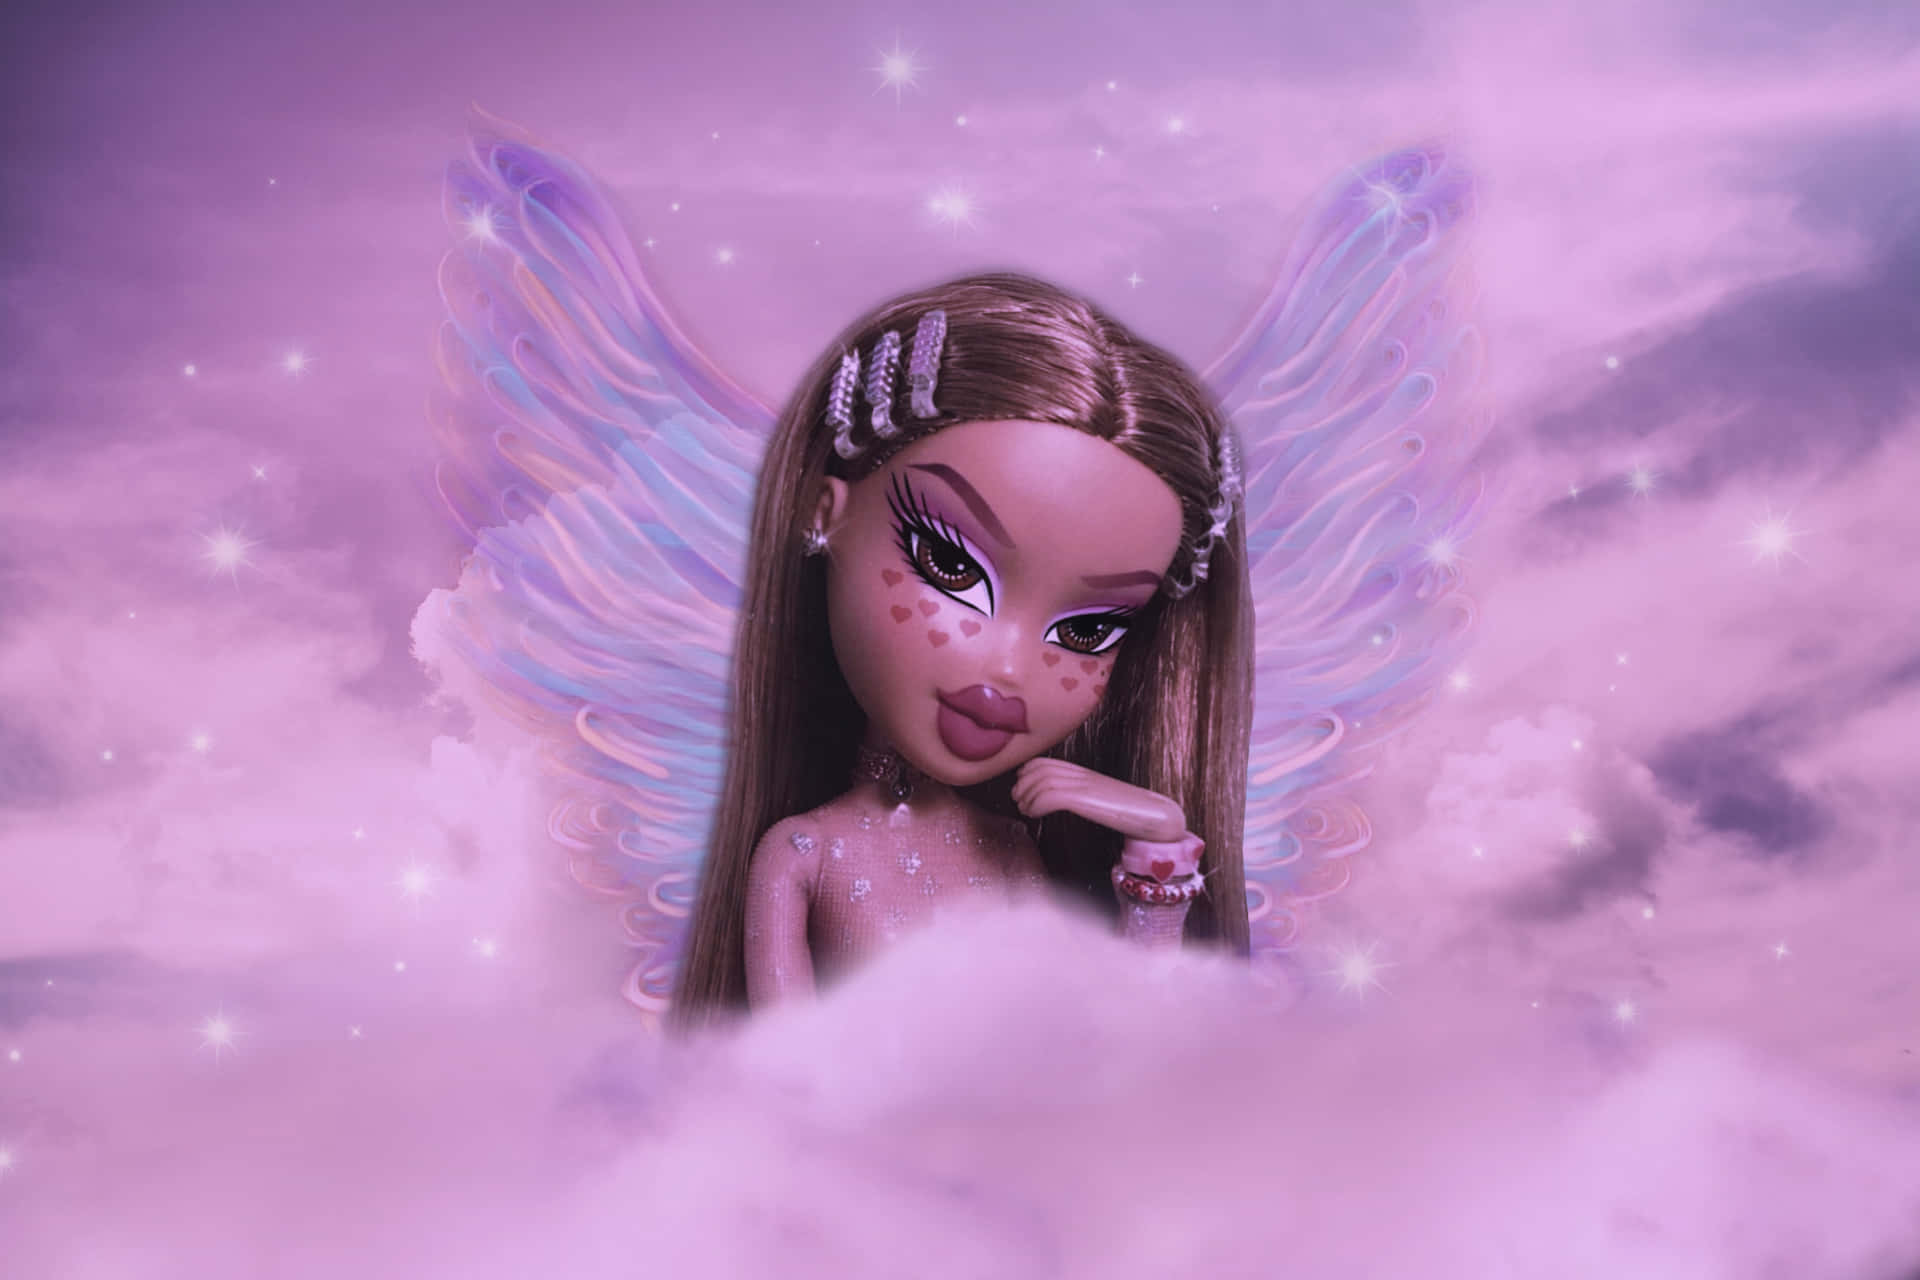 A doll with wings and sparkles on her face. - Bratz